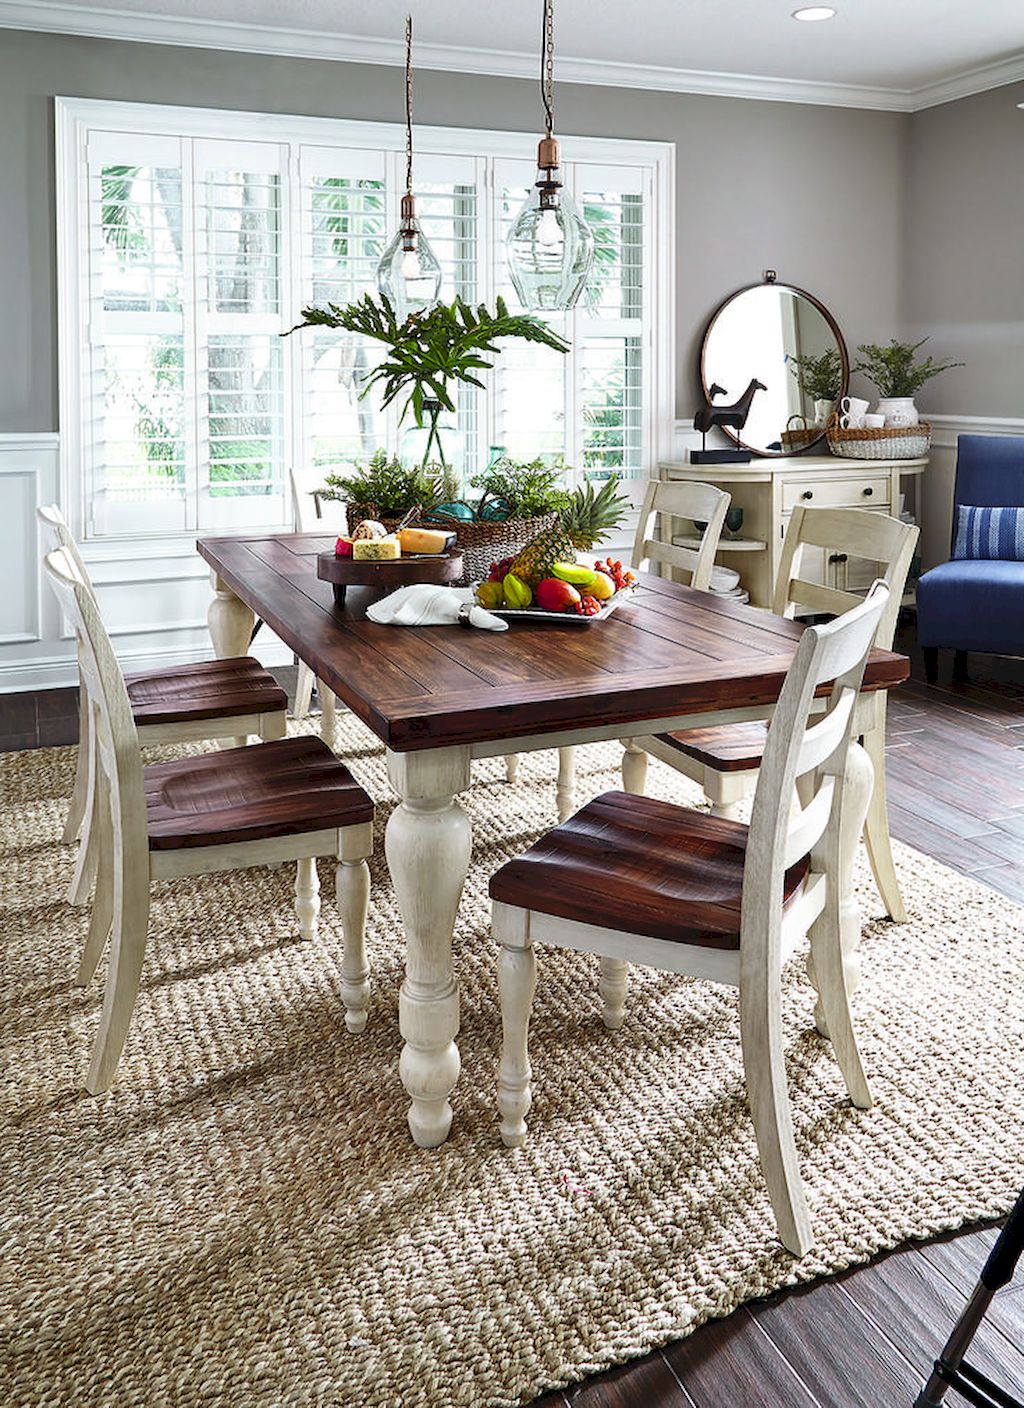 65 Timeless Farmhouse Dining Room Table and Decorating Ideas - Page 7 of 72